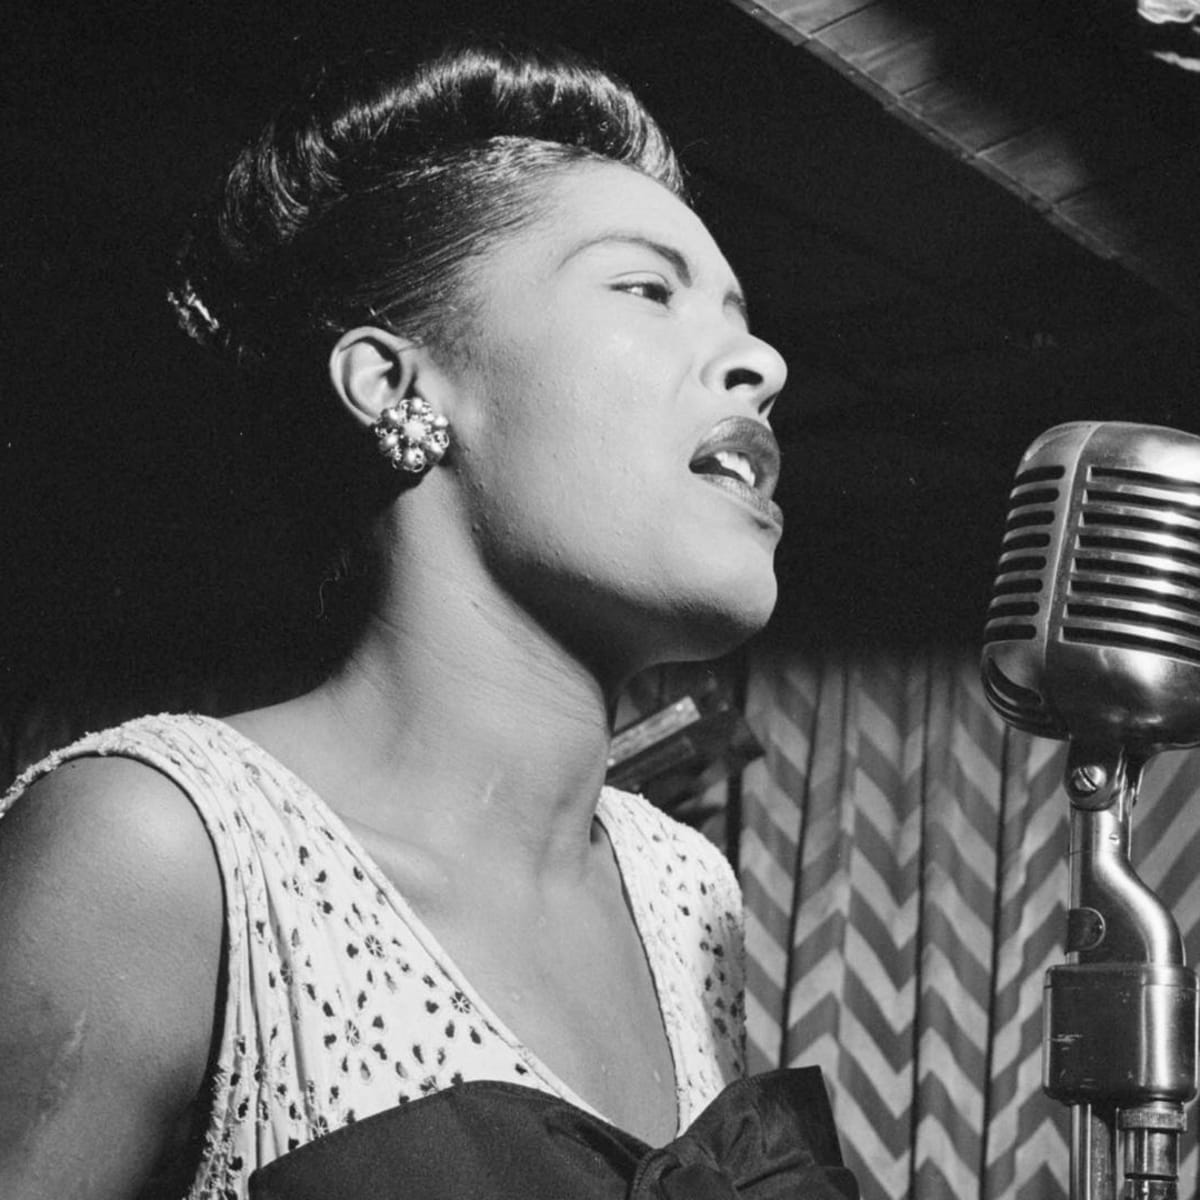 A black and white photo of Billie Holiday onstage, singing into a microphone.